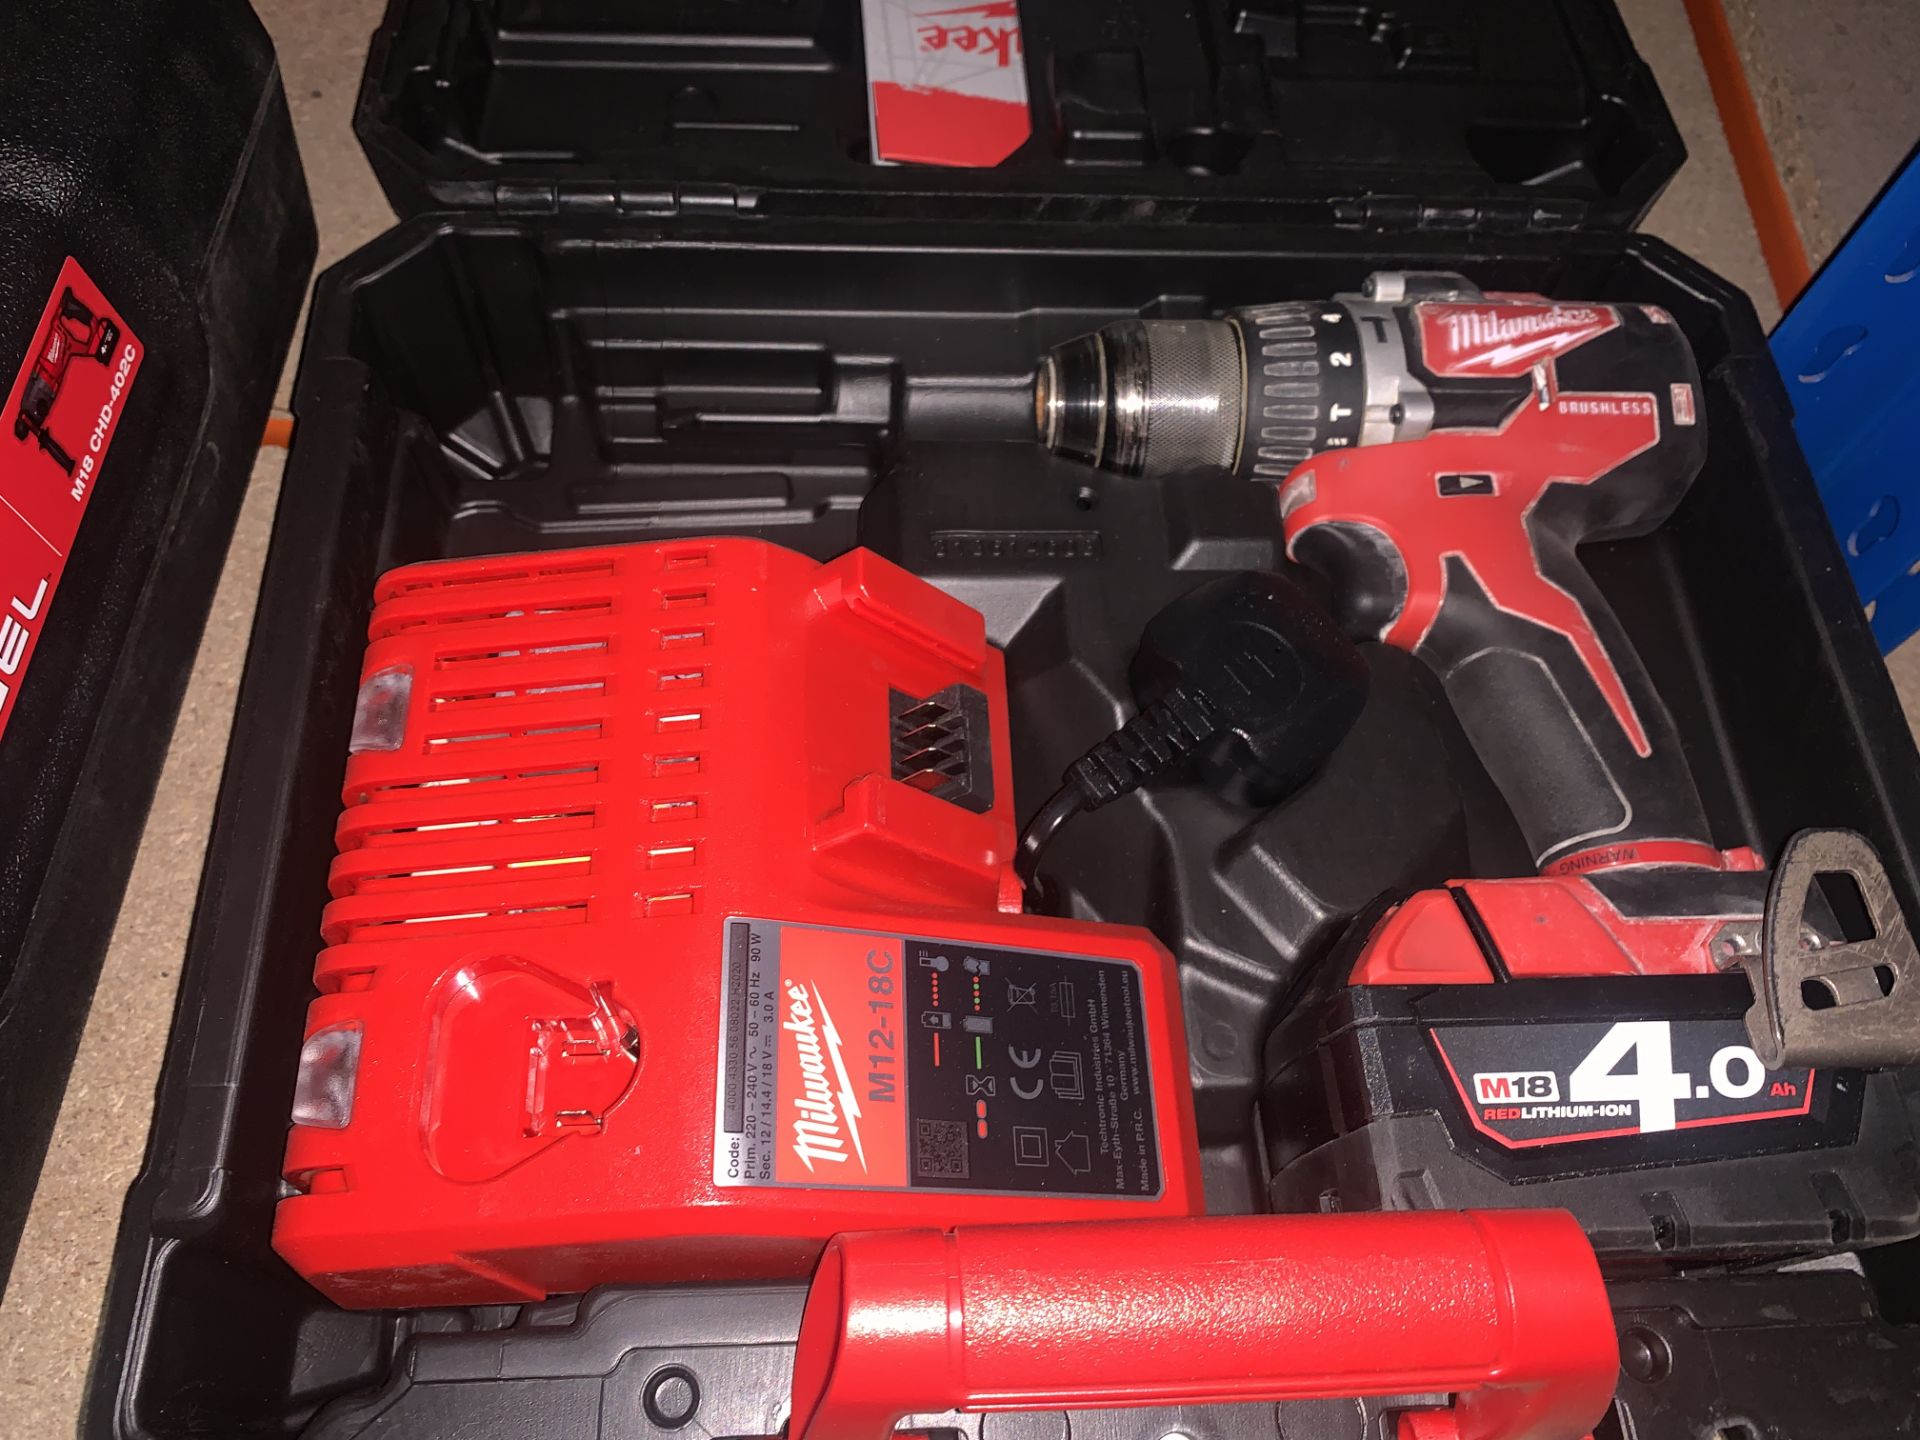 MILWAUKEE M18 CNLPD COMBI DRILL COMES WITH BATTERY, CHARGER AND CARRY CASE (UNCHECKED, UNTESTED)